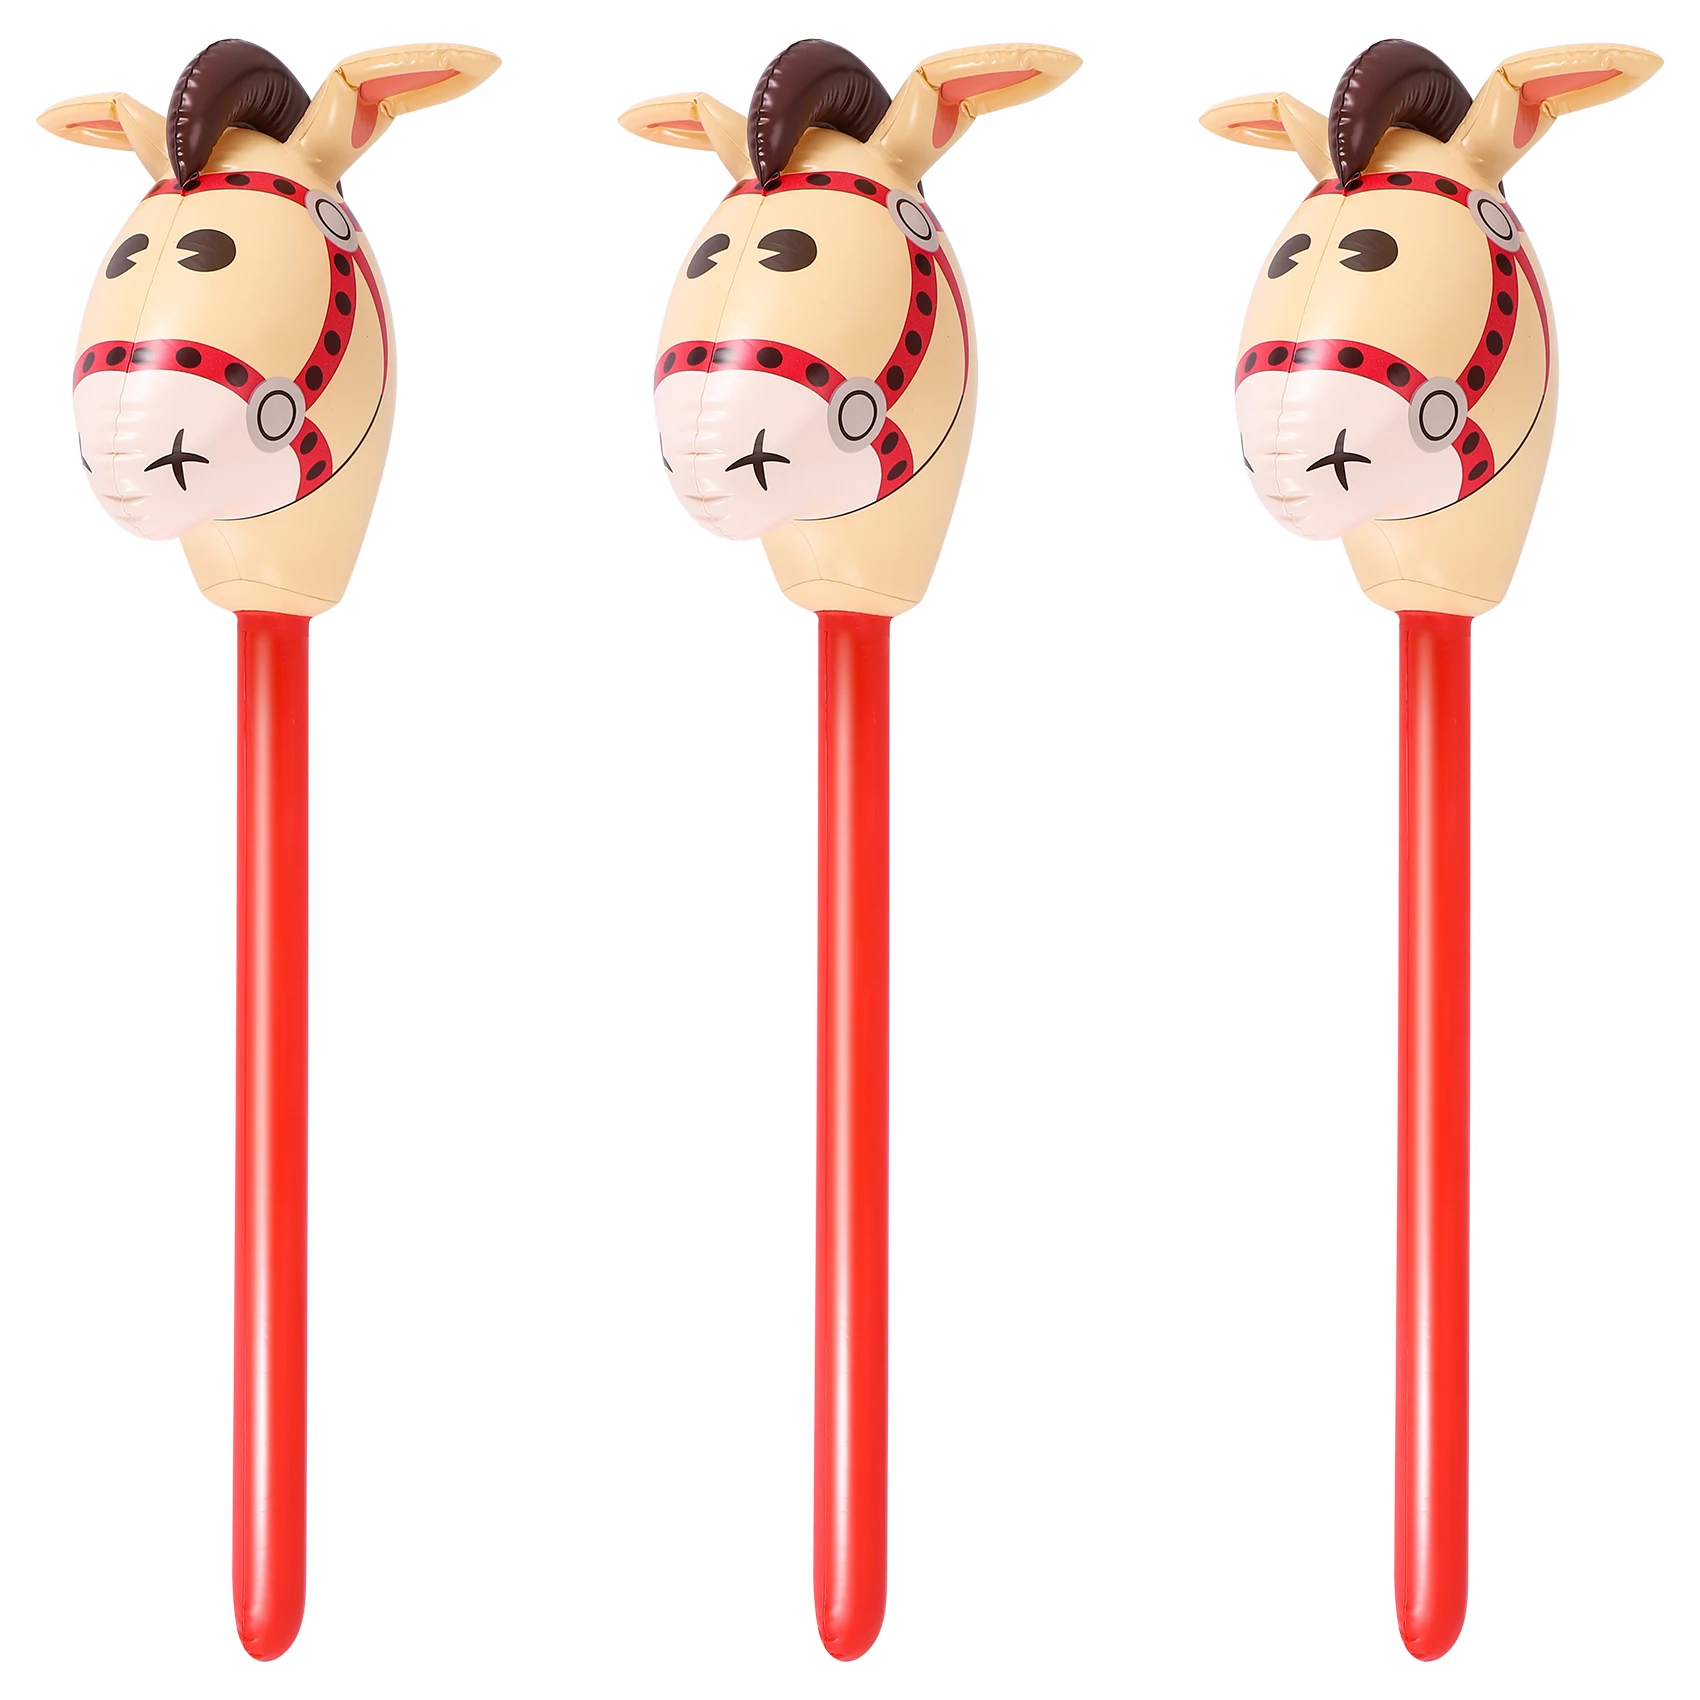 E heads cowgirl stick pvc balloon outdoor educational toys for children babies birthday thumb200